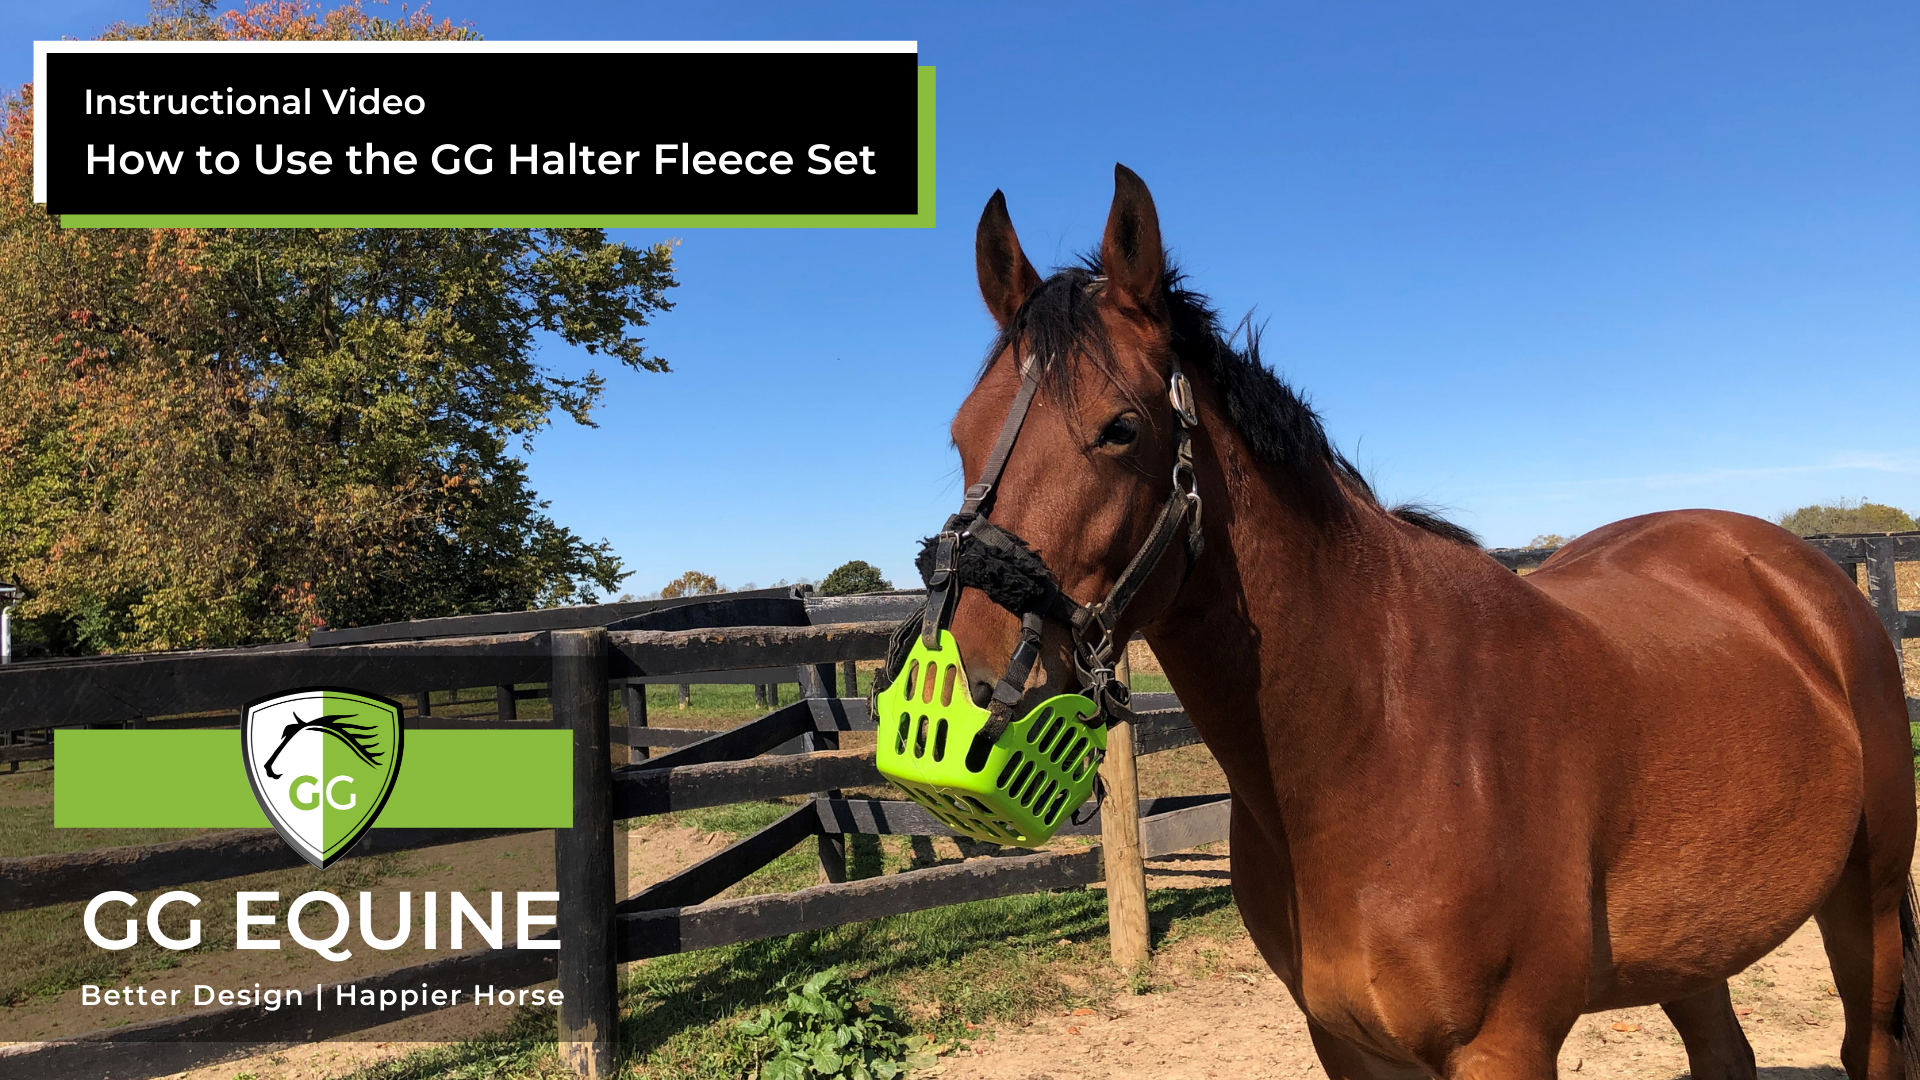 Load video: Full video instructions and tutorial on how to install and use the GG Equine Halter Fleece Converter Set.